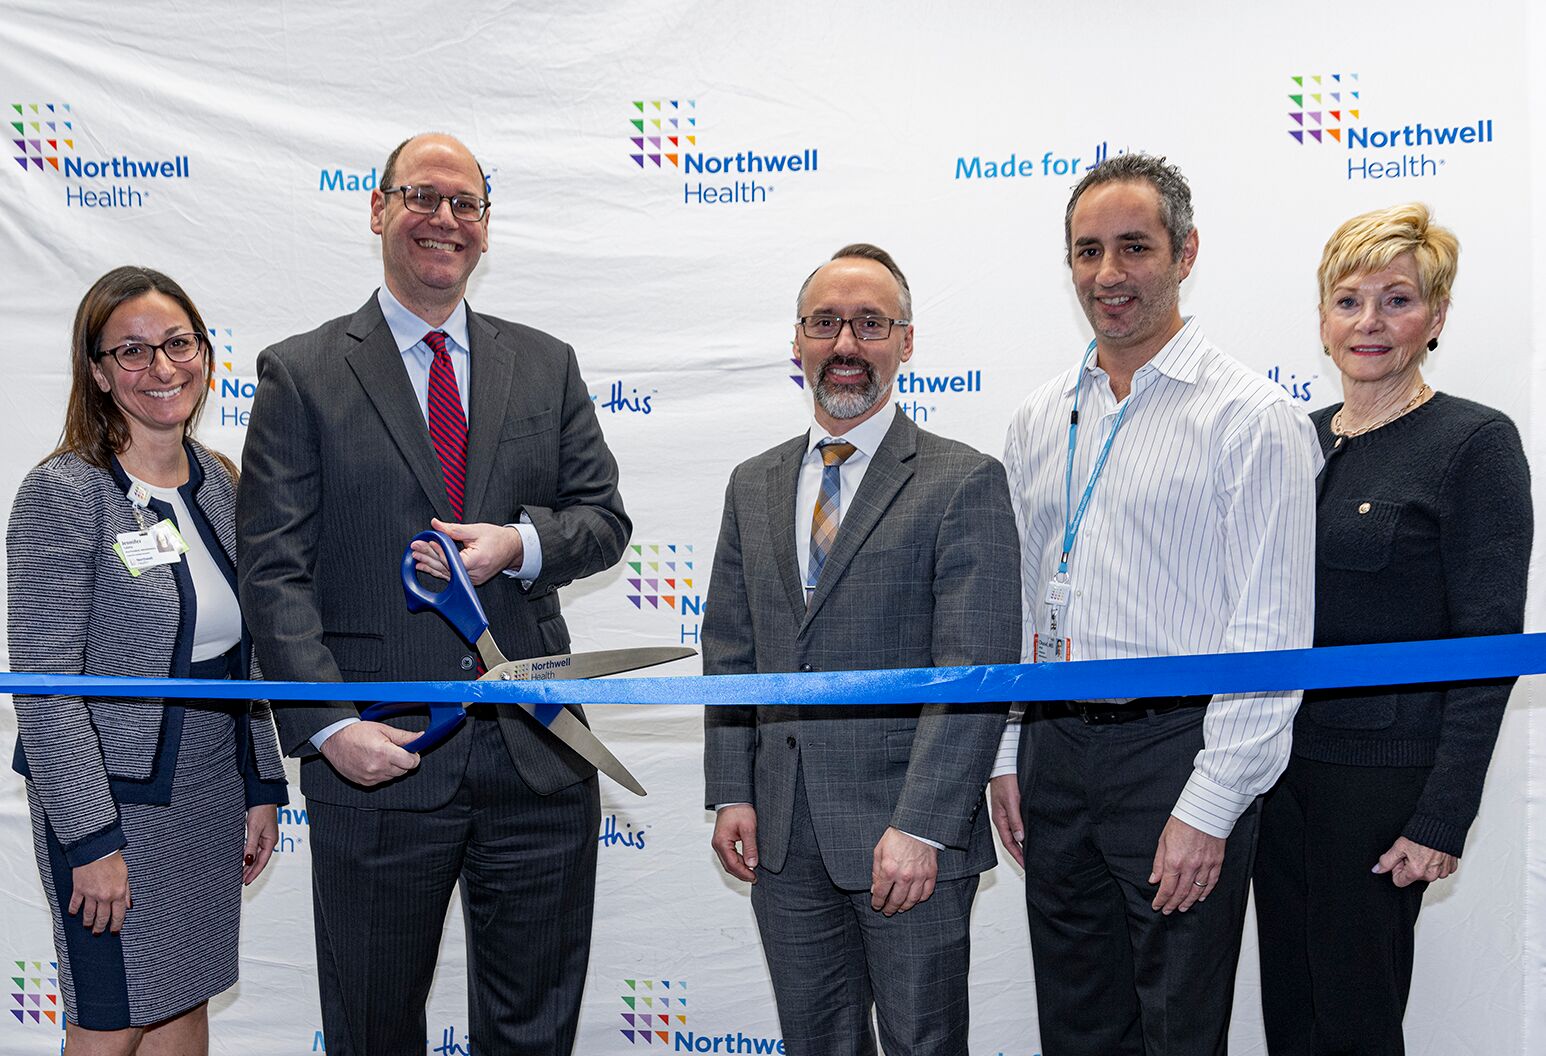 SUNY Empire Opens Fourth Long Island Campus